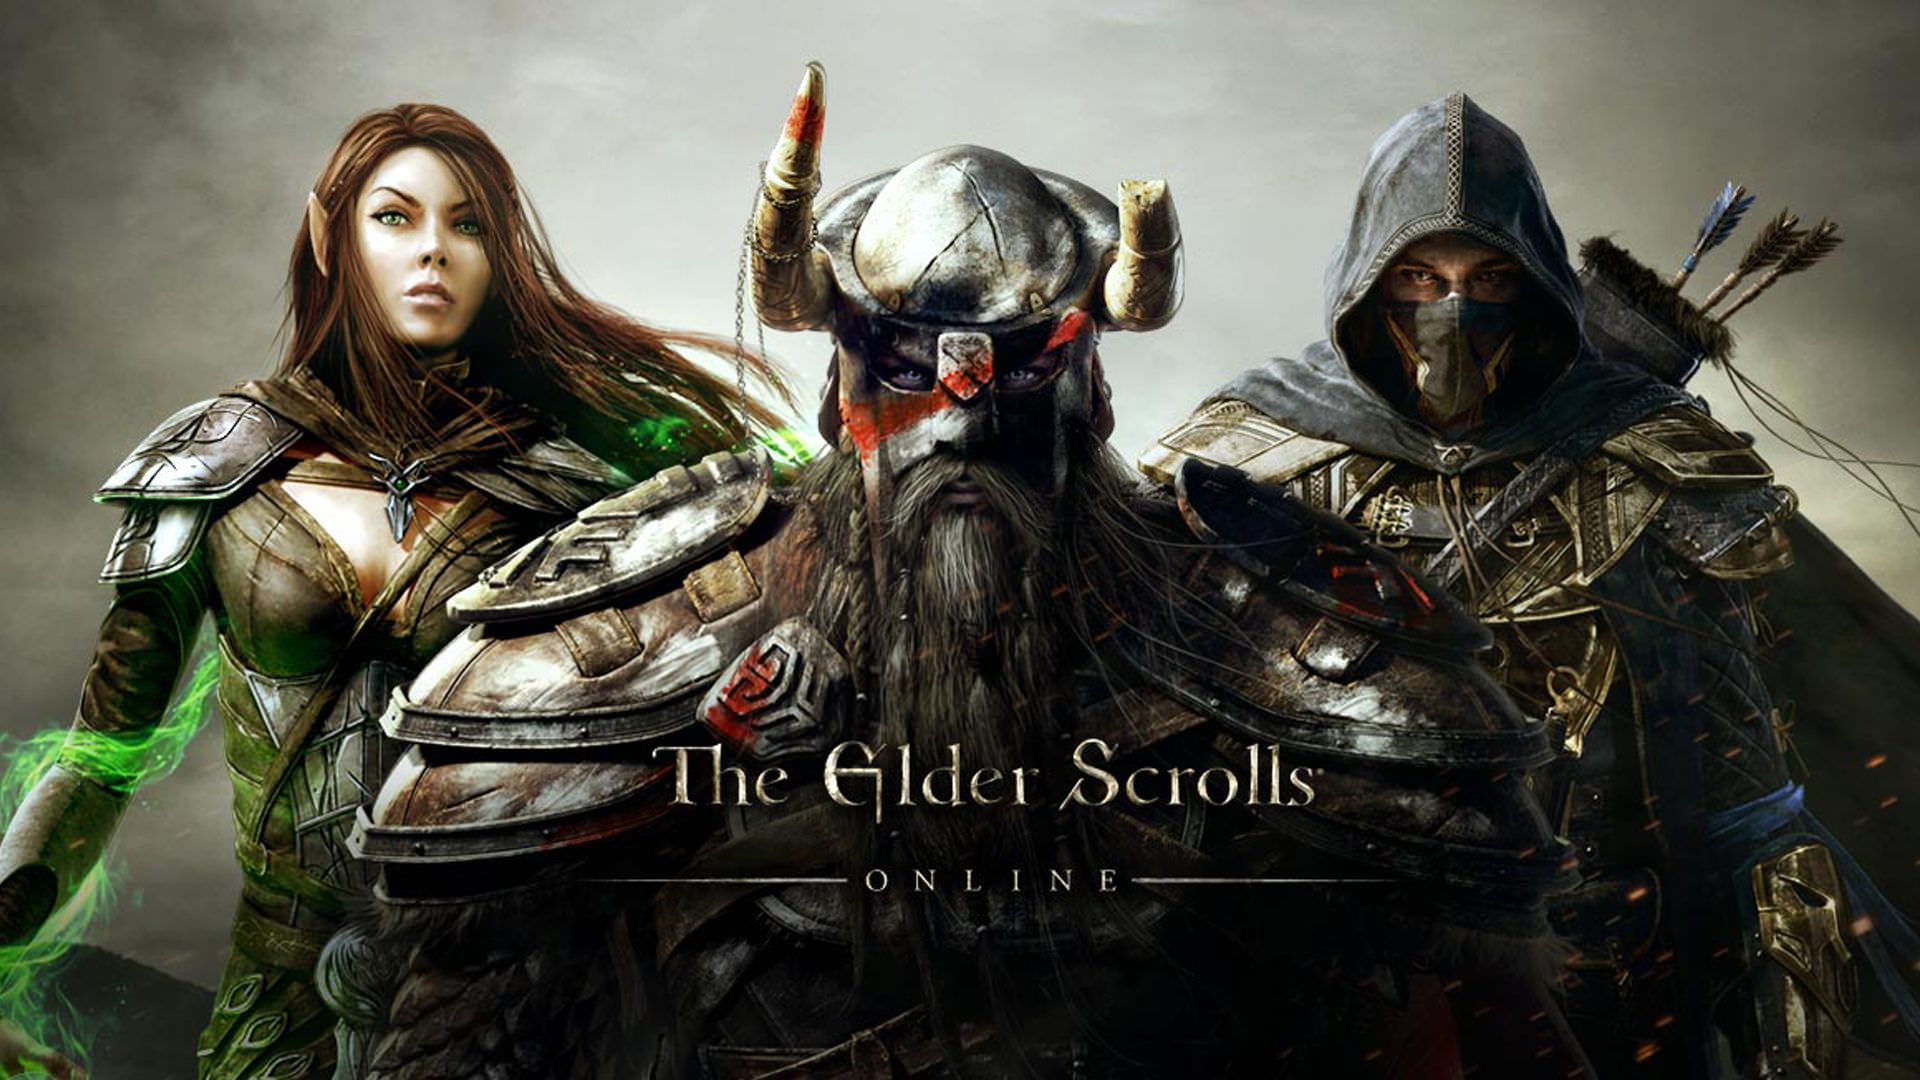 Most Compelling Reasons Why Elder Scrolls Online is a Terrible Disappointment